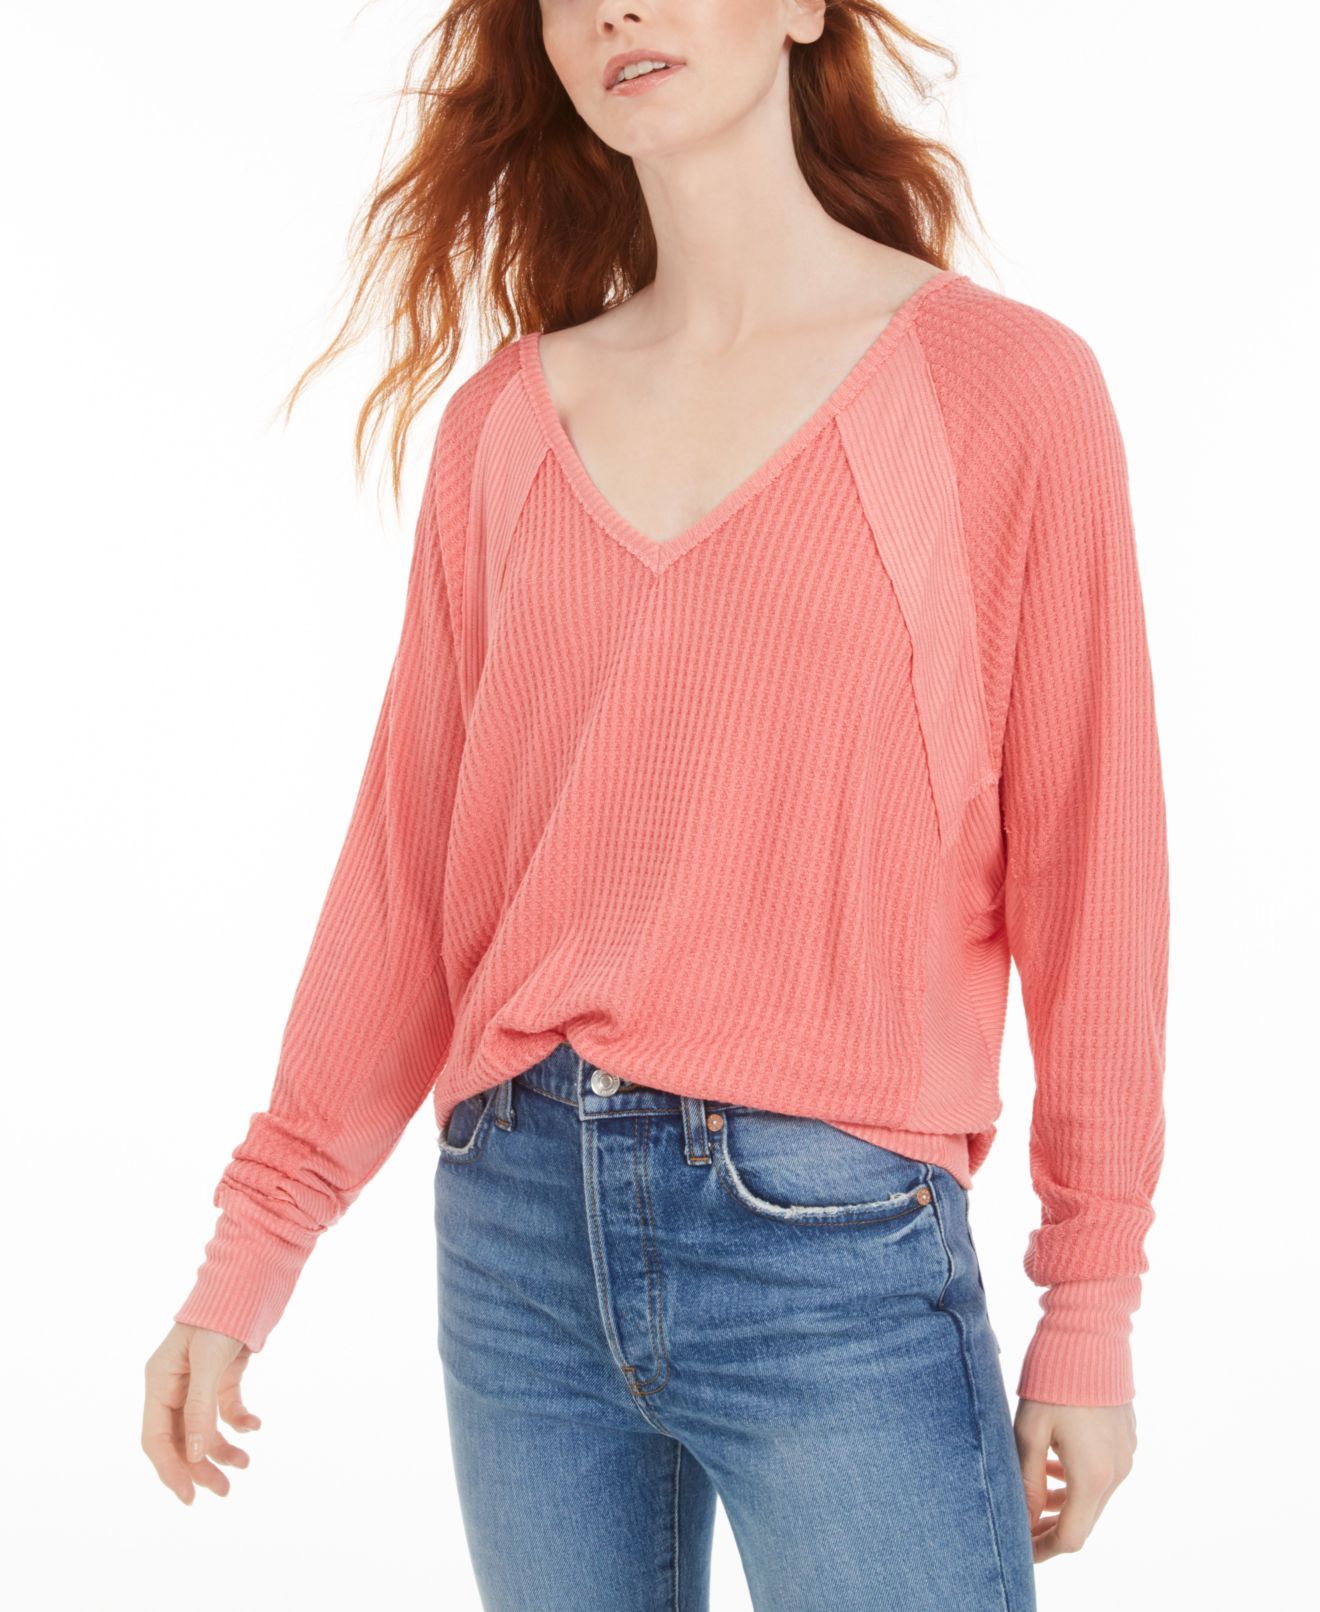 Color: Pinks Size Type: Regular Size (Women's): M Sleeve Length: Long Sleeve Type: Blouse Style: Basic Neckline: V-Neck Pattern: Solid Theme: Classic Material: Rayon